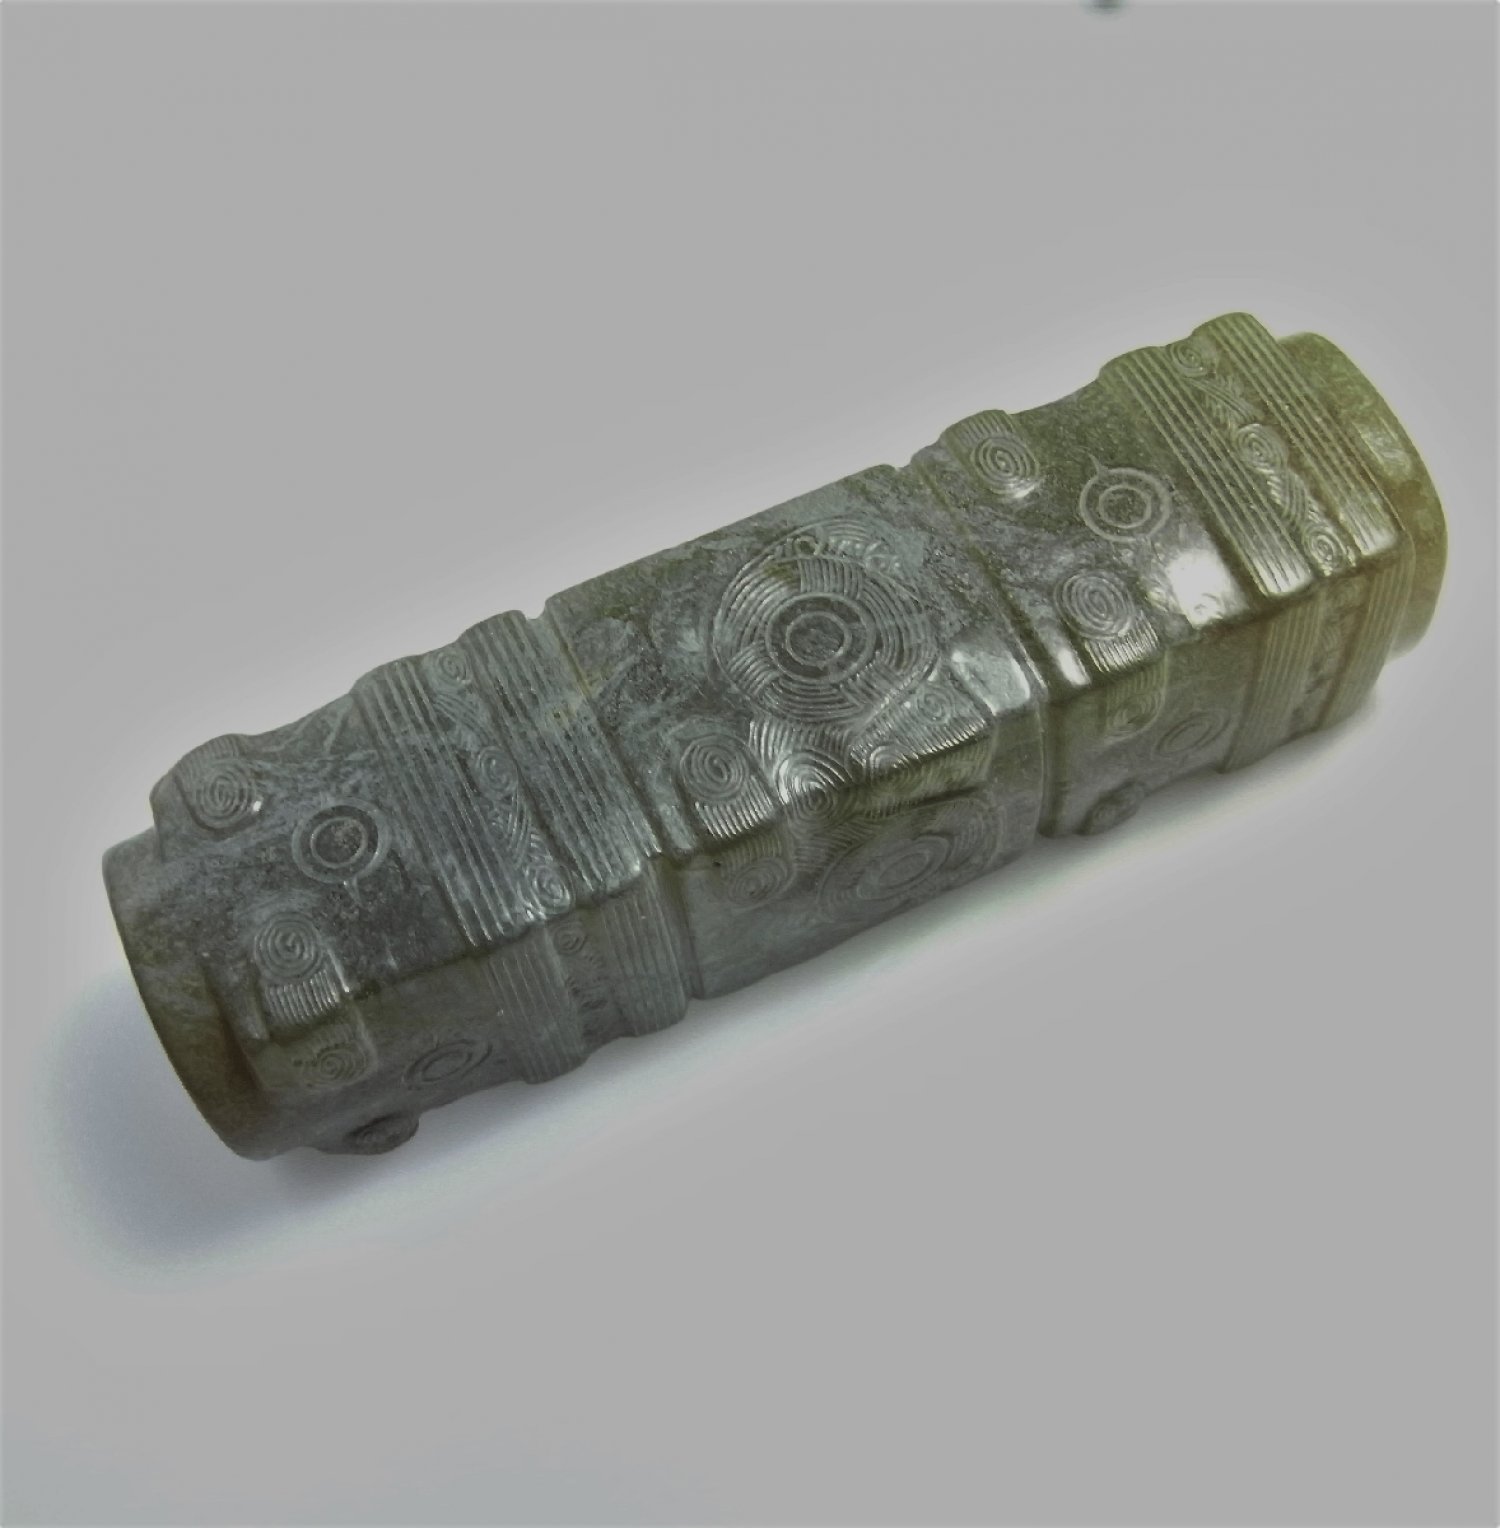 Ancient Jade Liangzhu Jade Amulet Pendant Cong Stone Age Artifacts and Art Antiquities Archaic Jades